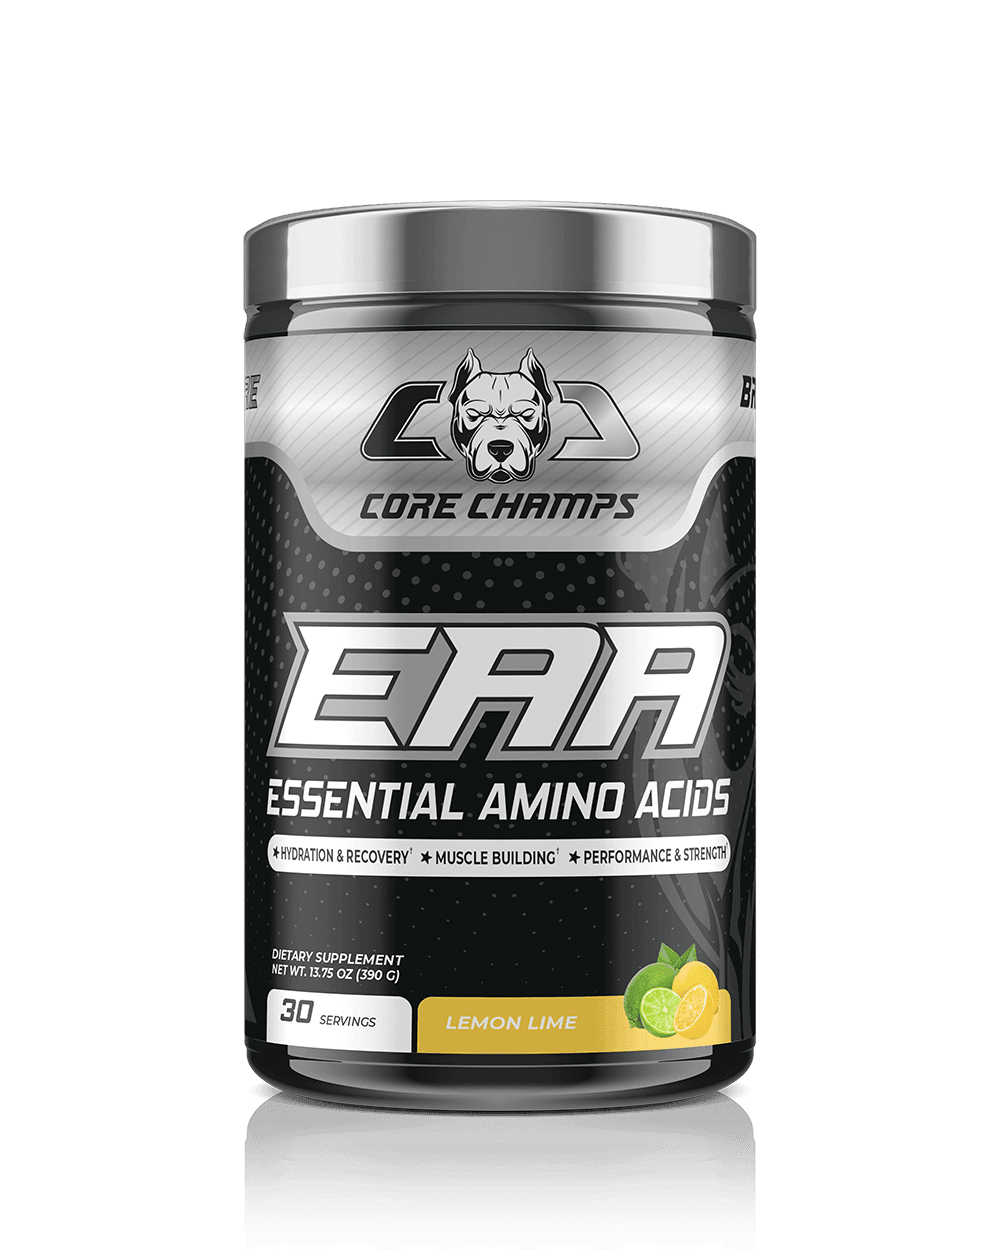 Core Champs EAA - The Supplements Factory